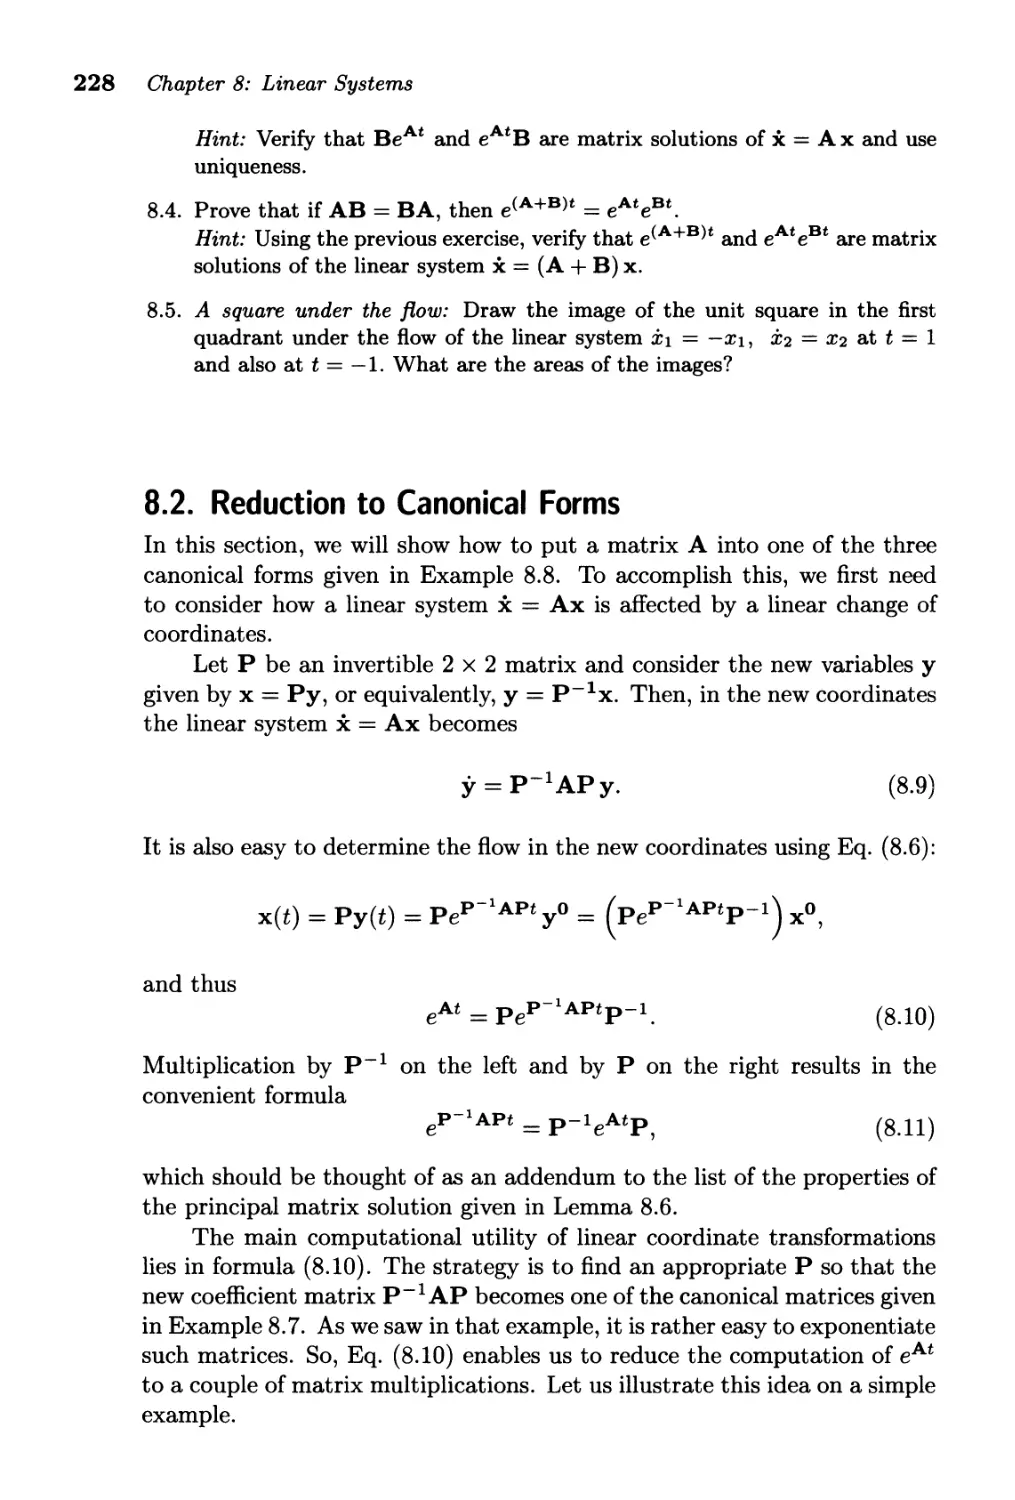 8.2. Reduction to Canonical Forms